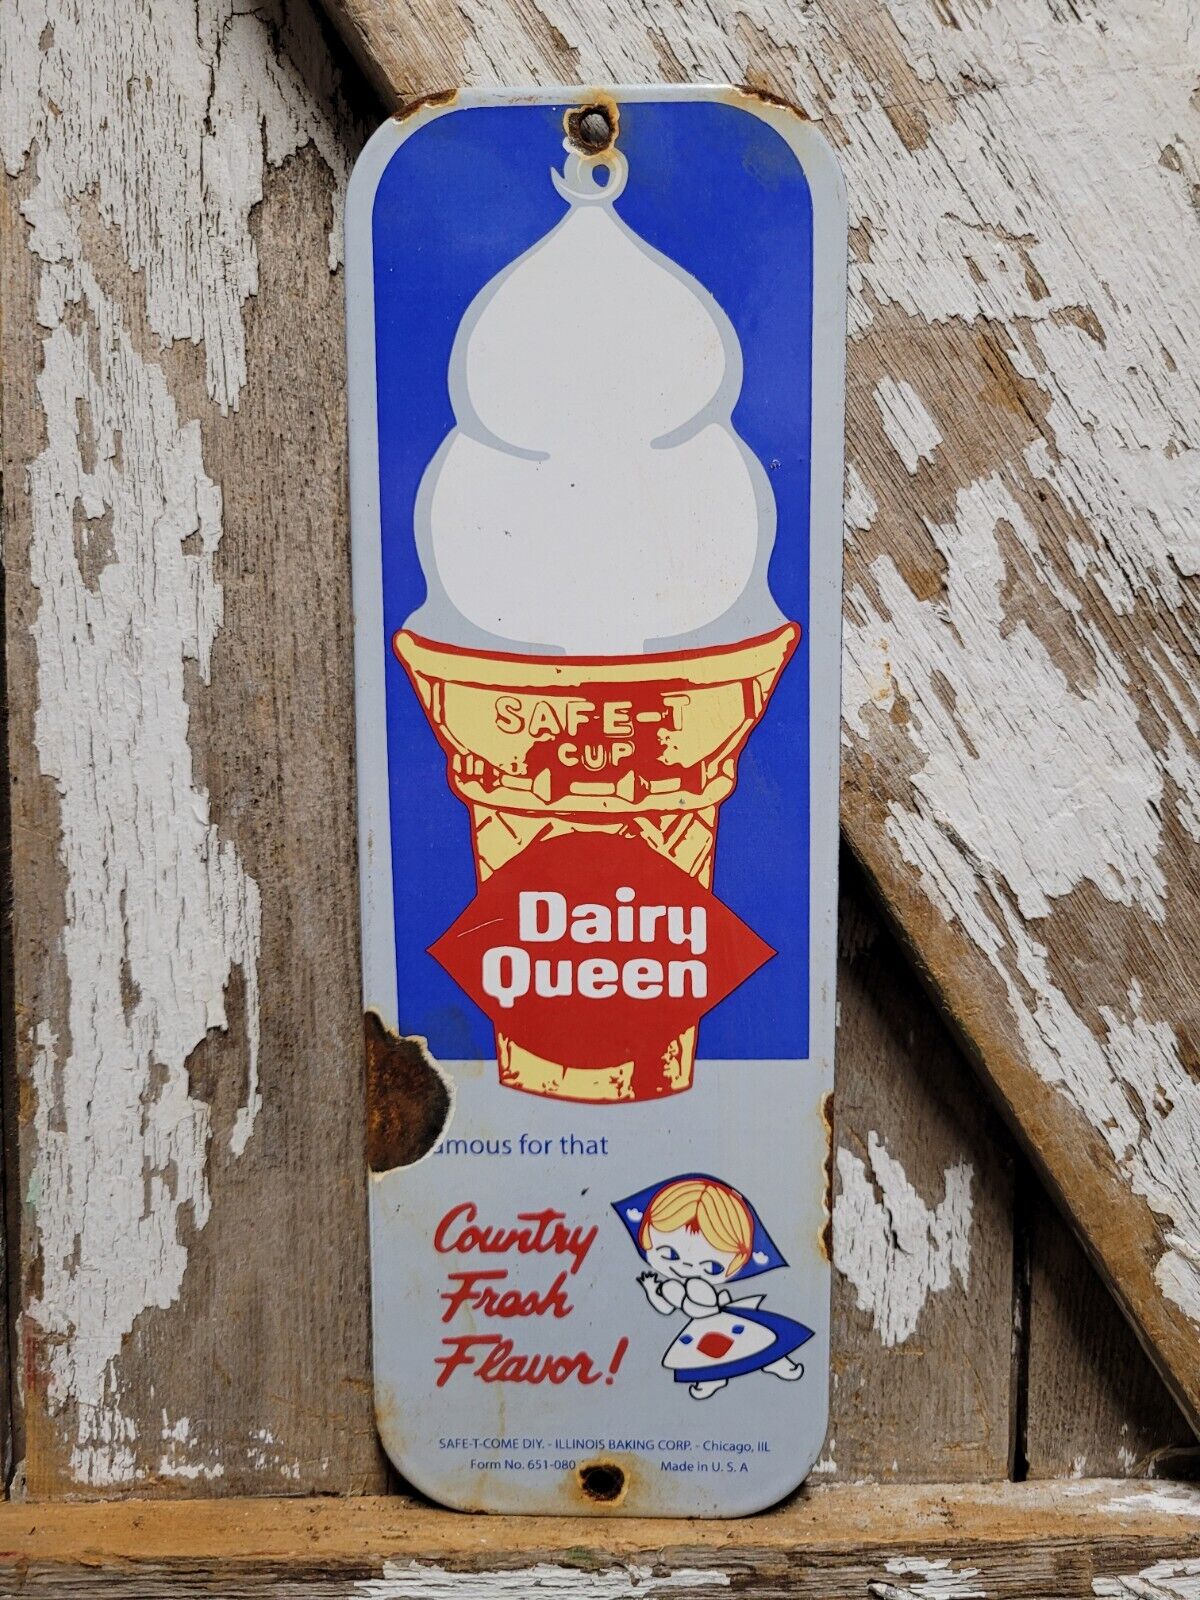 VINTAGE DAIRY QUEEN PORCELAIN SIGN ICE CREAM PARLOR SWEET MILK TREAT SAFE-T-COME